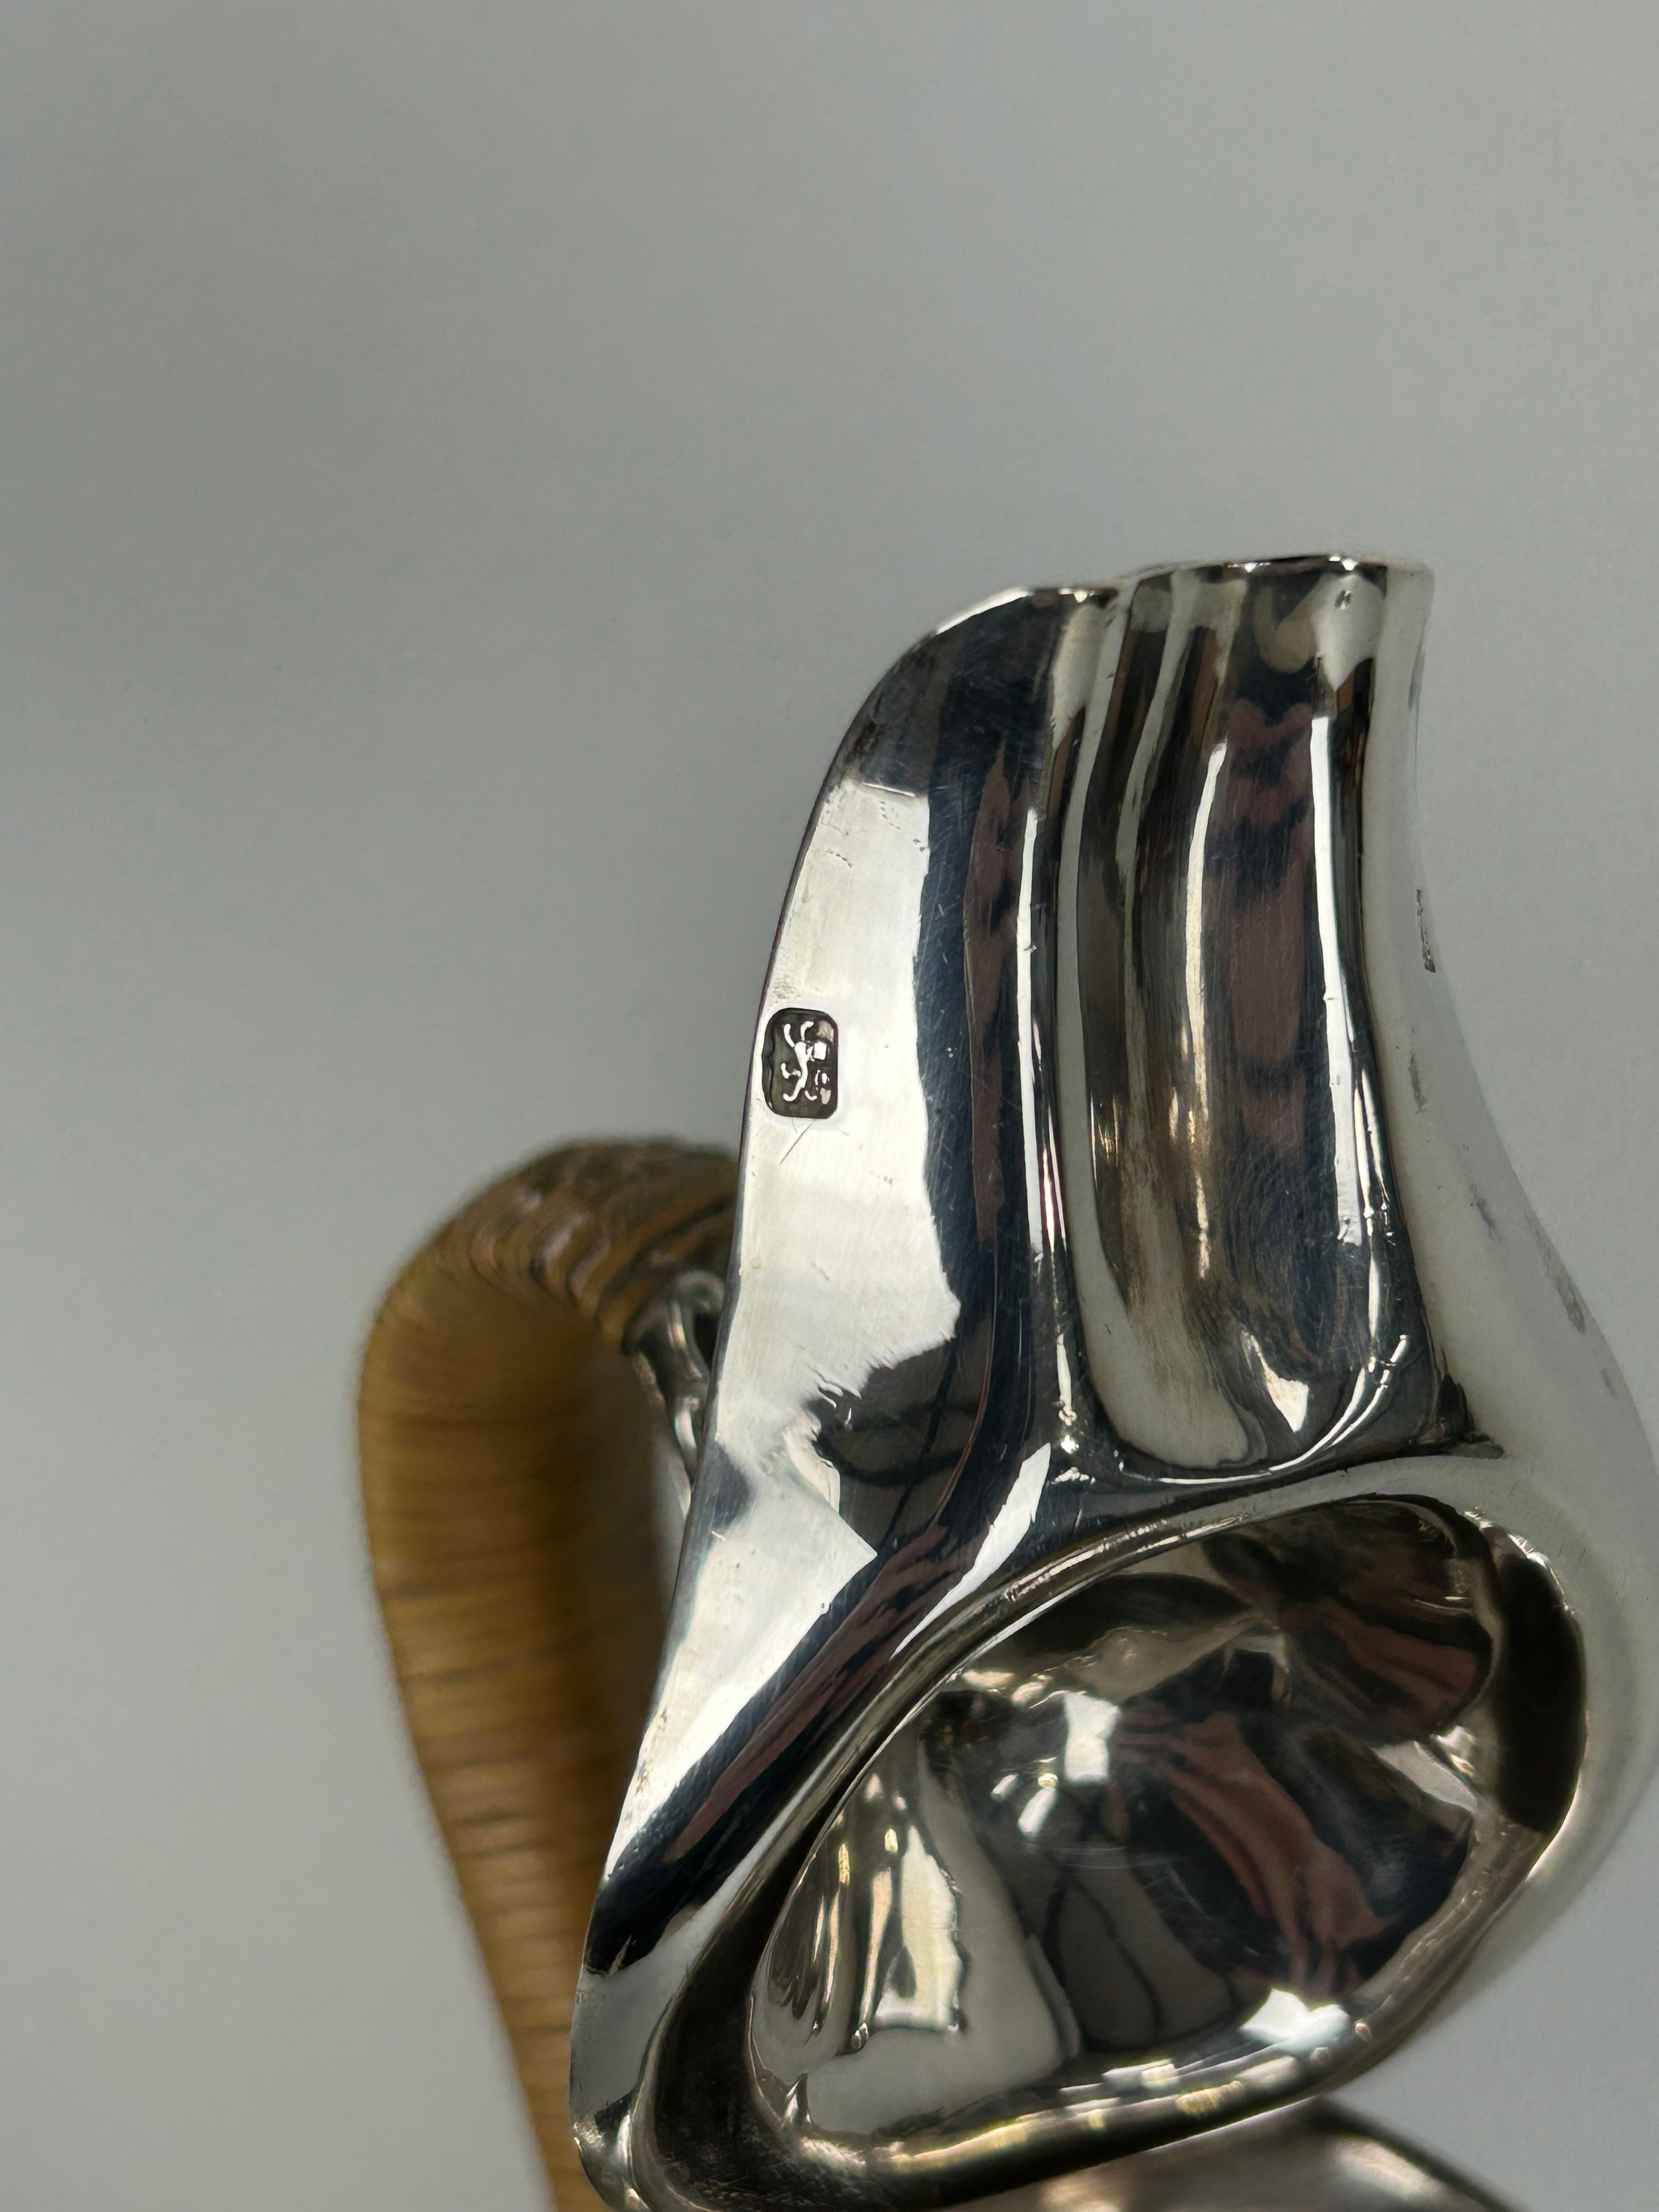 A GEORGE III SILVER COFFEE POT CIRCA 1776-78 WITH MARKS FOR ROBERT MAKEPEACE AND RICHARD CARTER, - Image 4 of 7